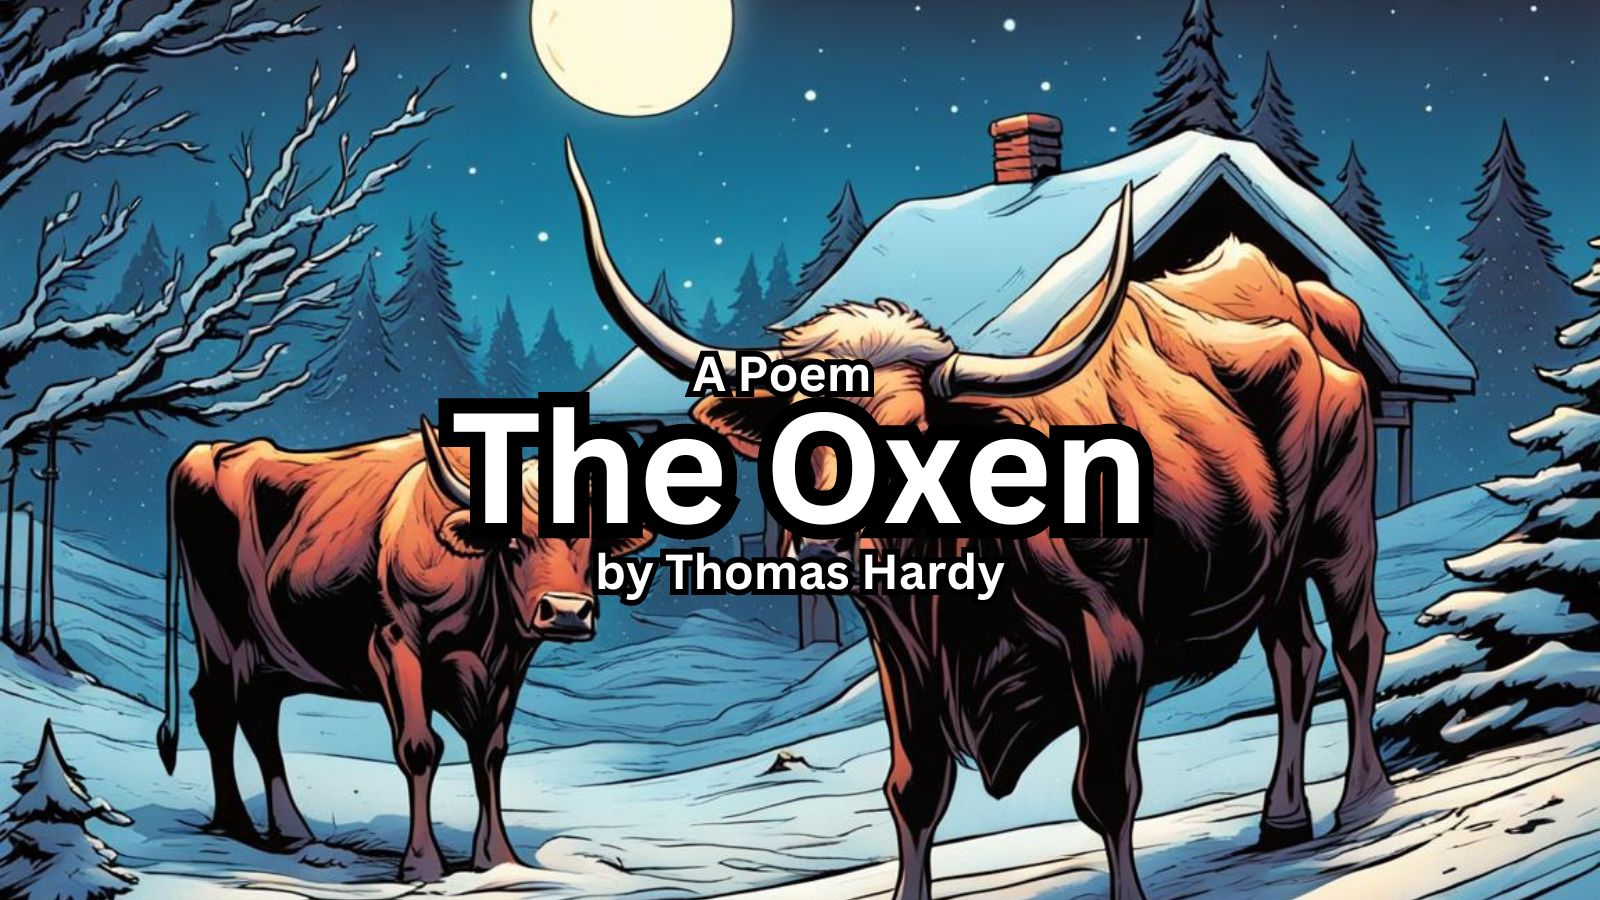 The Oxen by Thomas Hardy